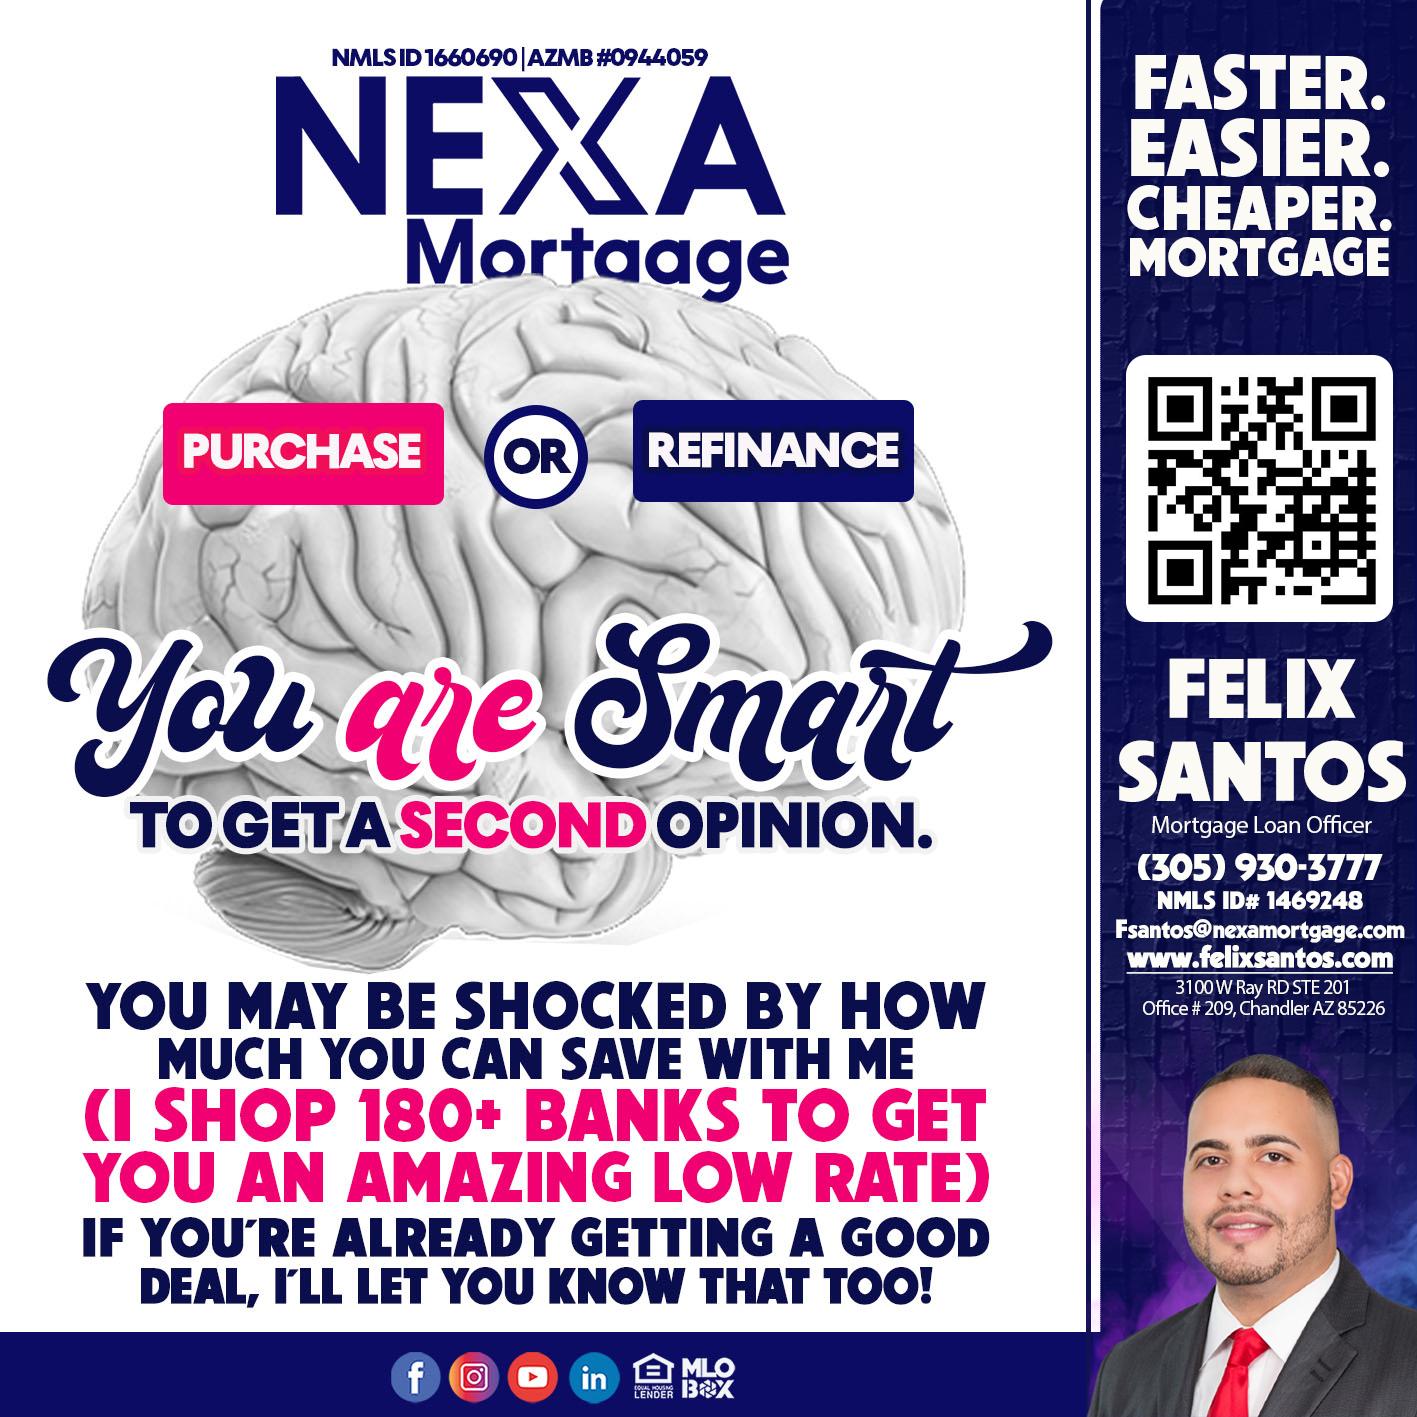 YOU ARE SMART - Felix Santos -Mortgage Loan Officer